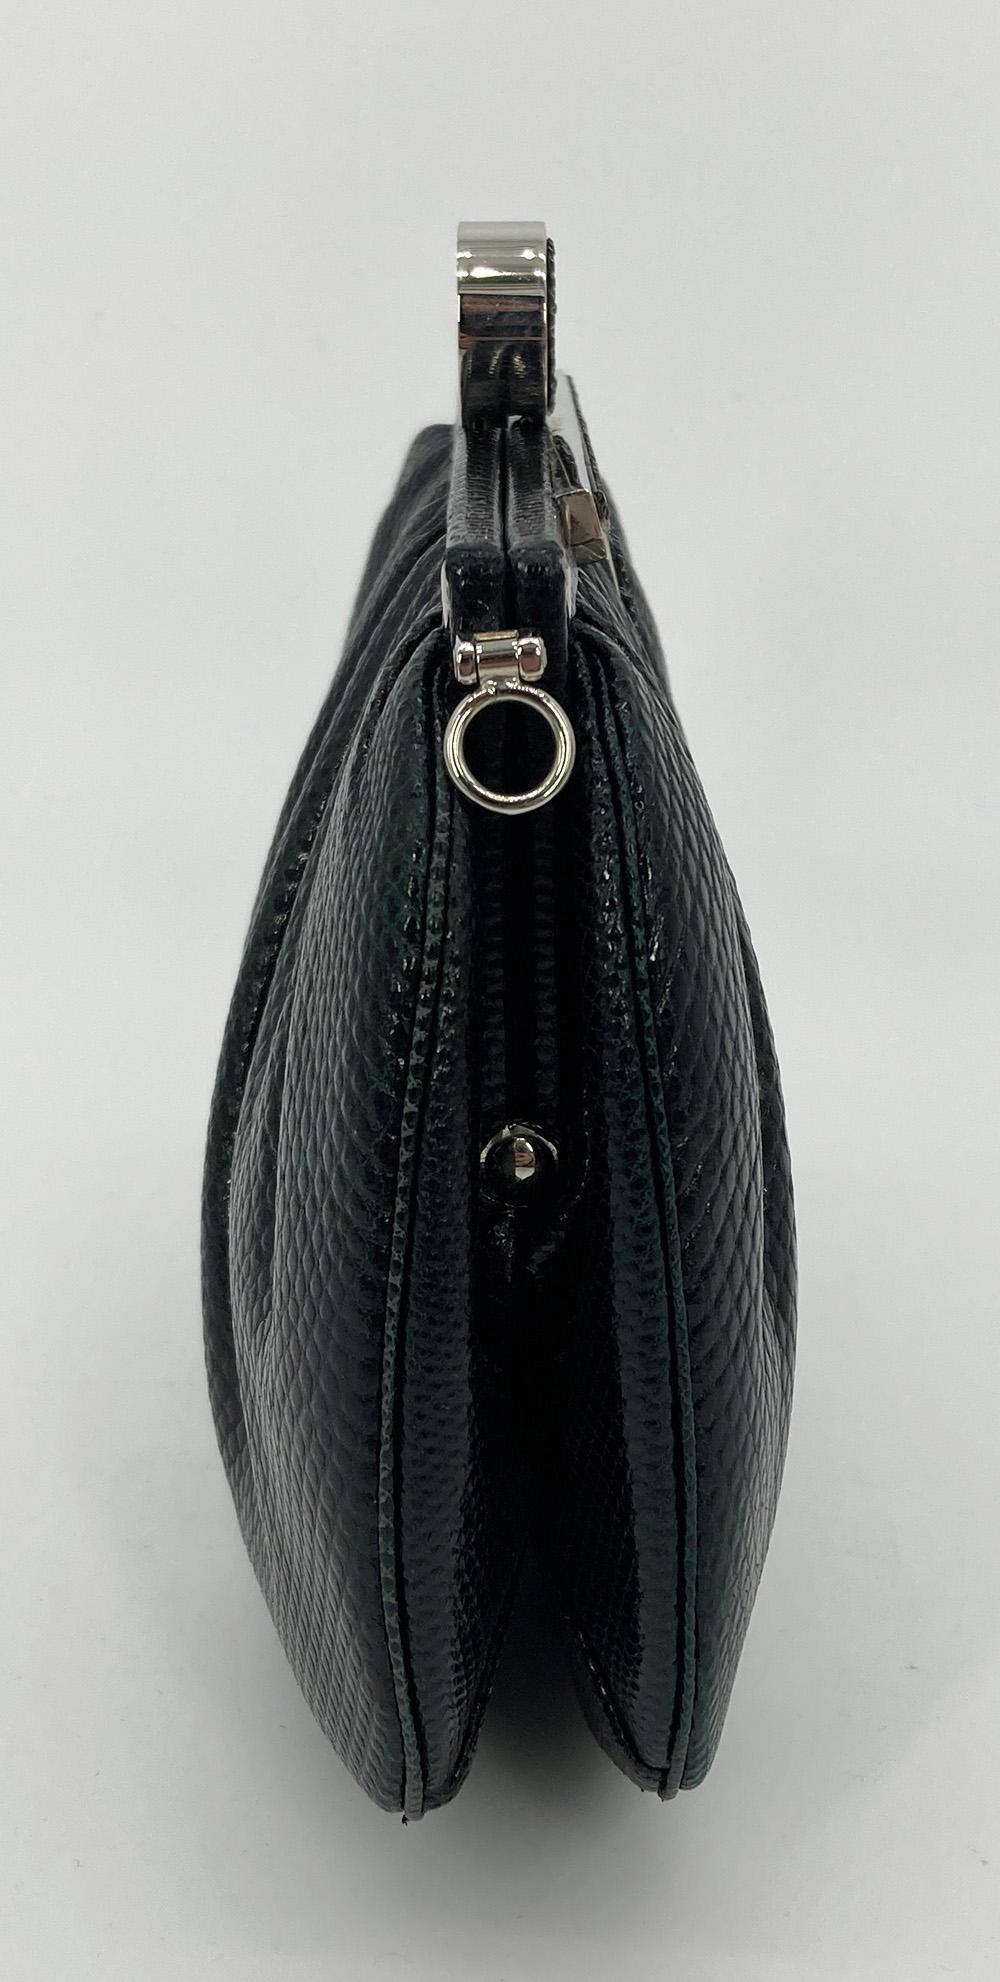 Vintage Judith Leiber Black Lizard Crystal Top Clutch in very good condition. Black lizard exterior trimmed with silver hardware and black and clear crystal top accents. Lift latch closure opens to a black satin interior with one slit and one zip